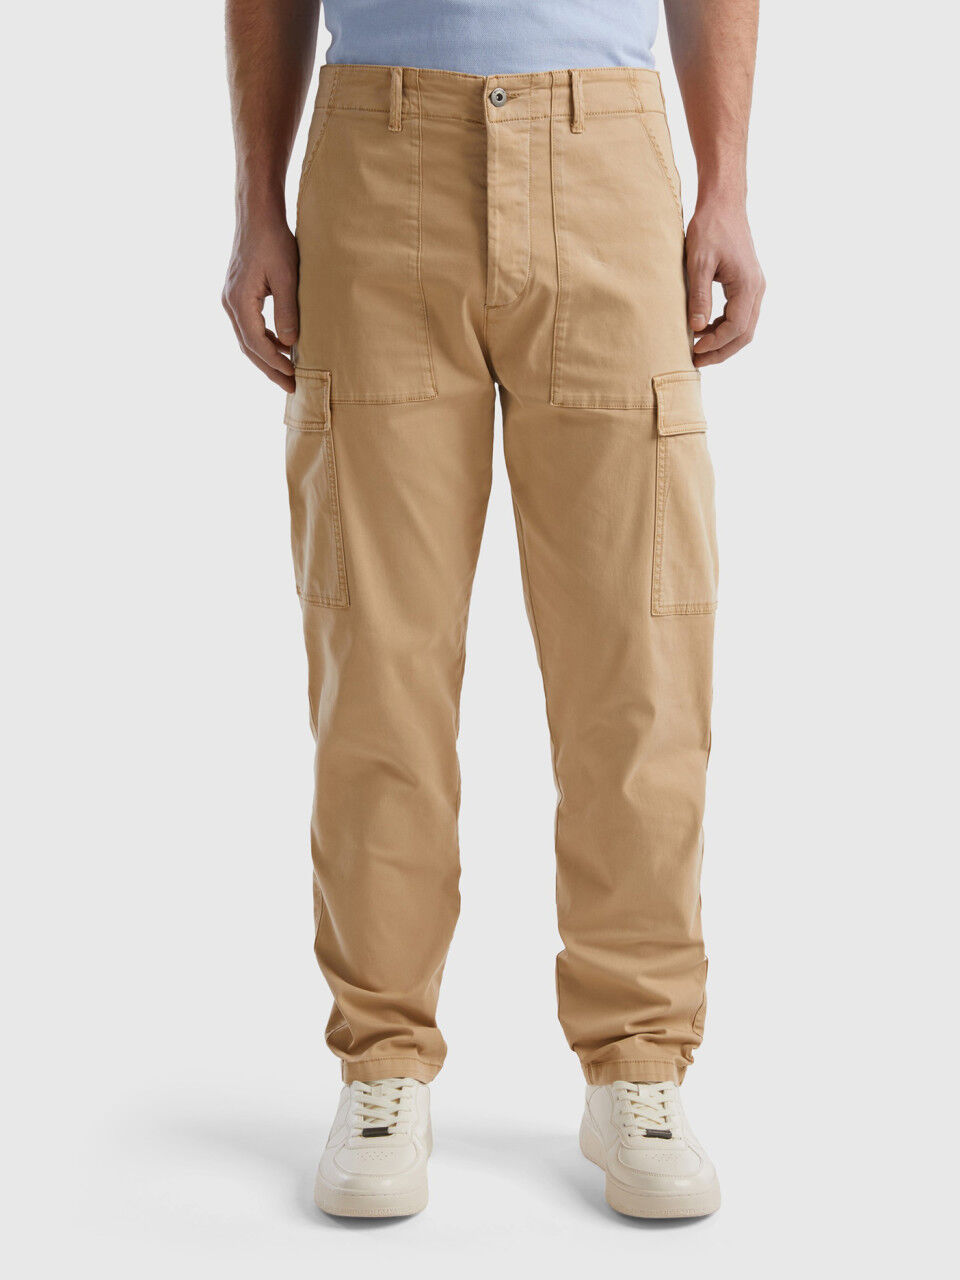 Olive Solid Cotton Elastane Men Slim Fit Cargo Trousers - Selling Fast at  Pantaloons.com